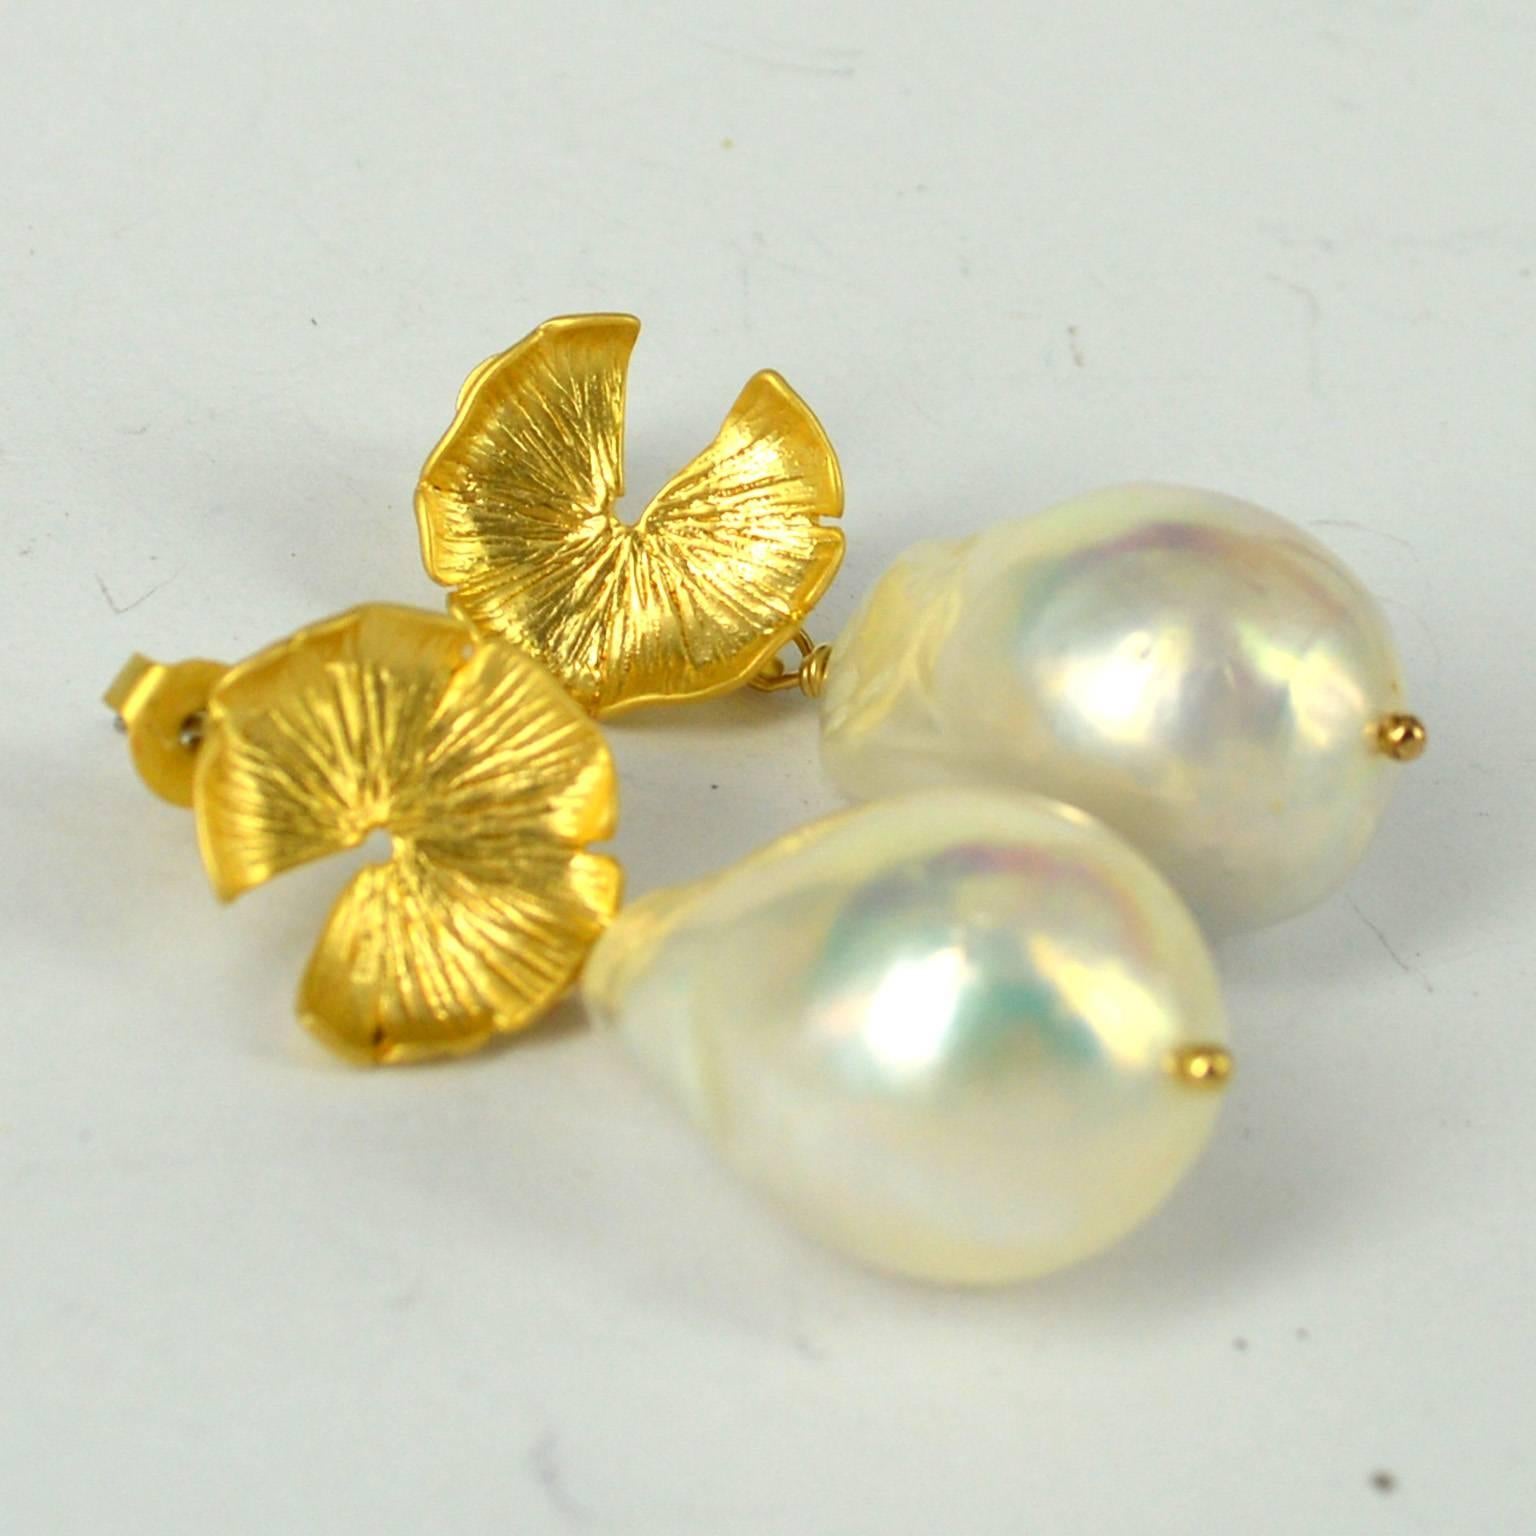 Luscious large Baroque Fresh Water Pearls 20x14mm with a Gold plate stud, post that goes through the ear is Gold plate Sterling Silver, head pins are 14k Gold Filled.
length of Earrings from the post is 35mm 